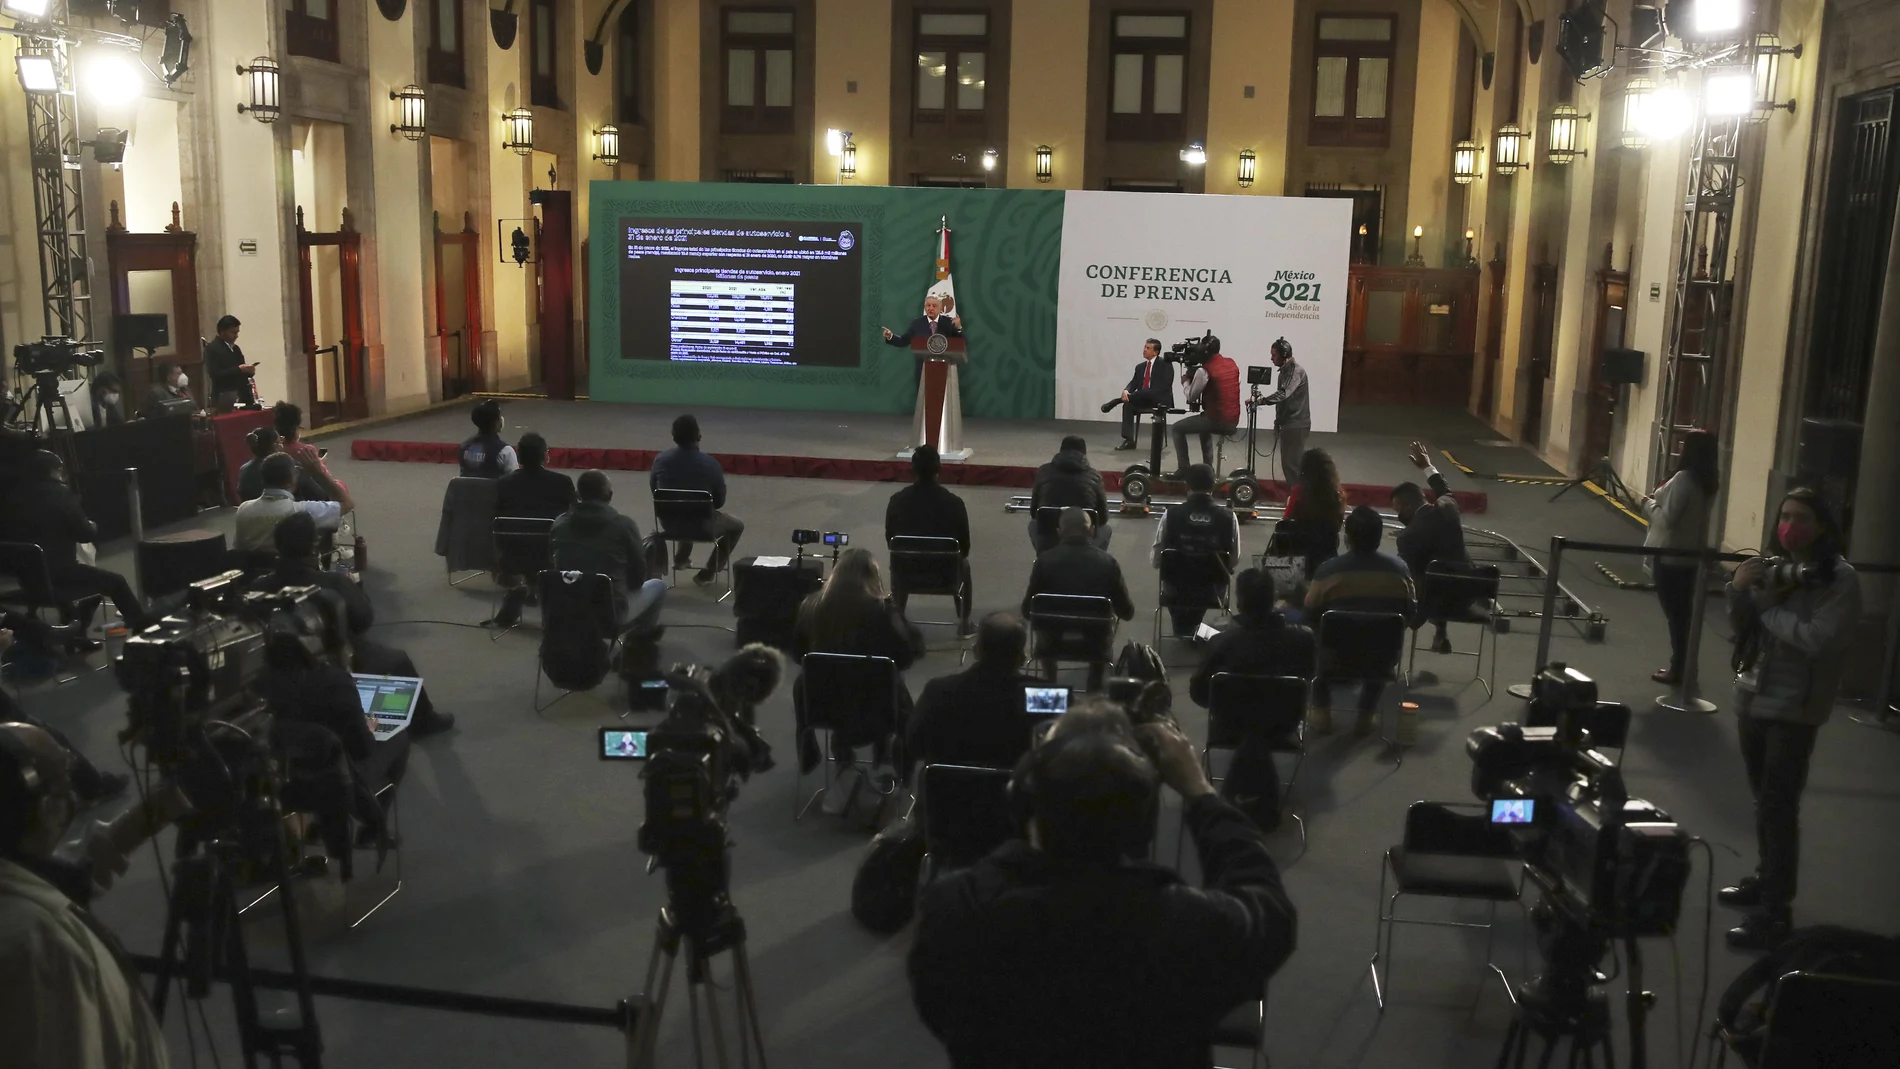 Mexican President AndrÃ©s Manuel LÃ³pez Obrador gives his daily morning press conference following a two-week absence after he tested positive for coronavirus, at the presidential palace, Palacio Nacional, in Mexico City, Monday, Feb. 8, 2021. (AP Photo/Marco Ugarte)